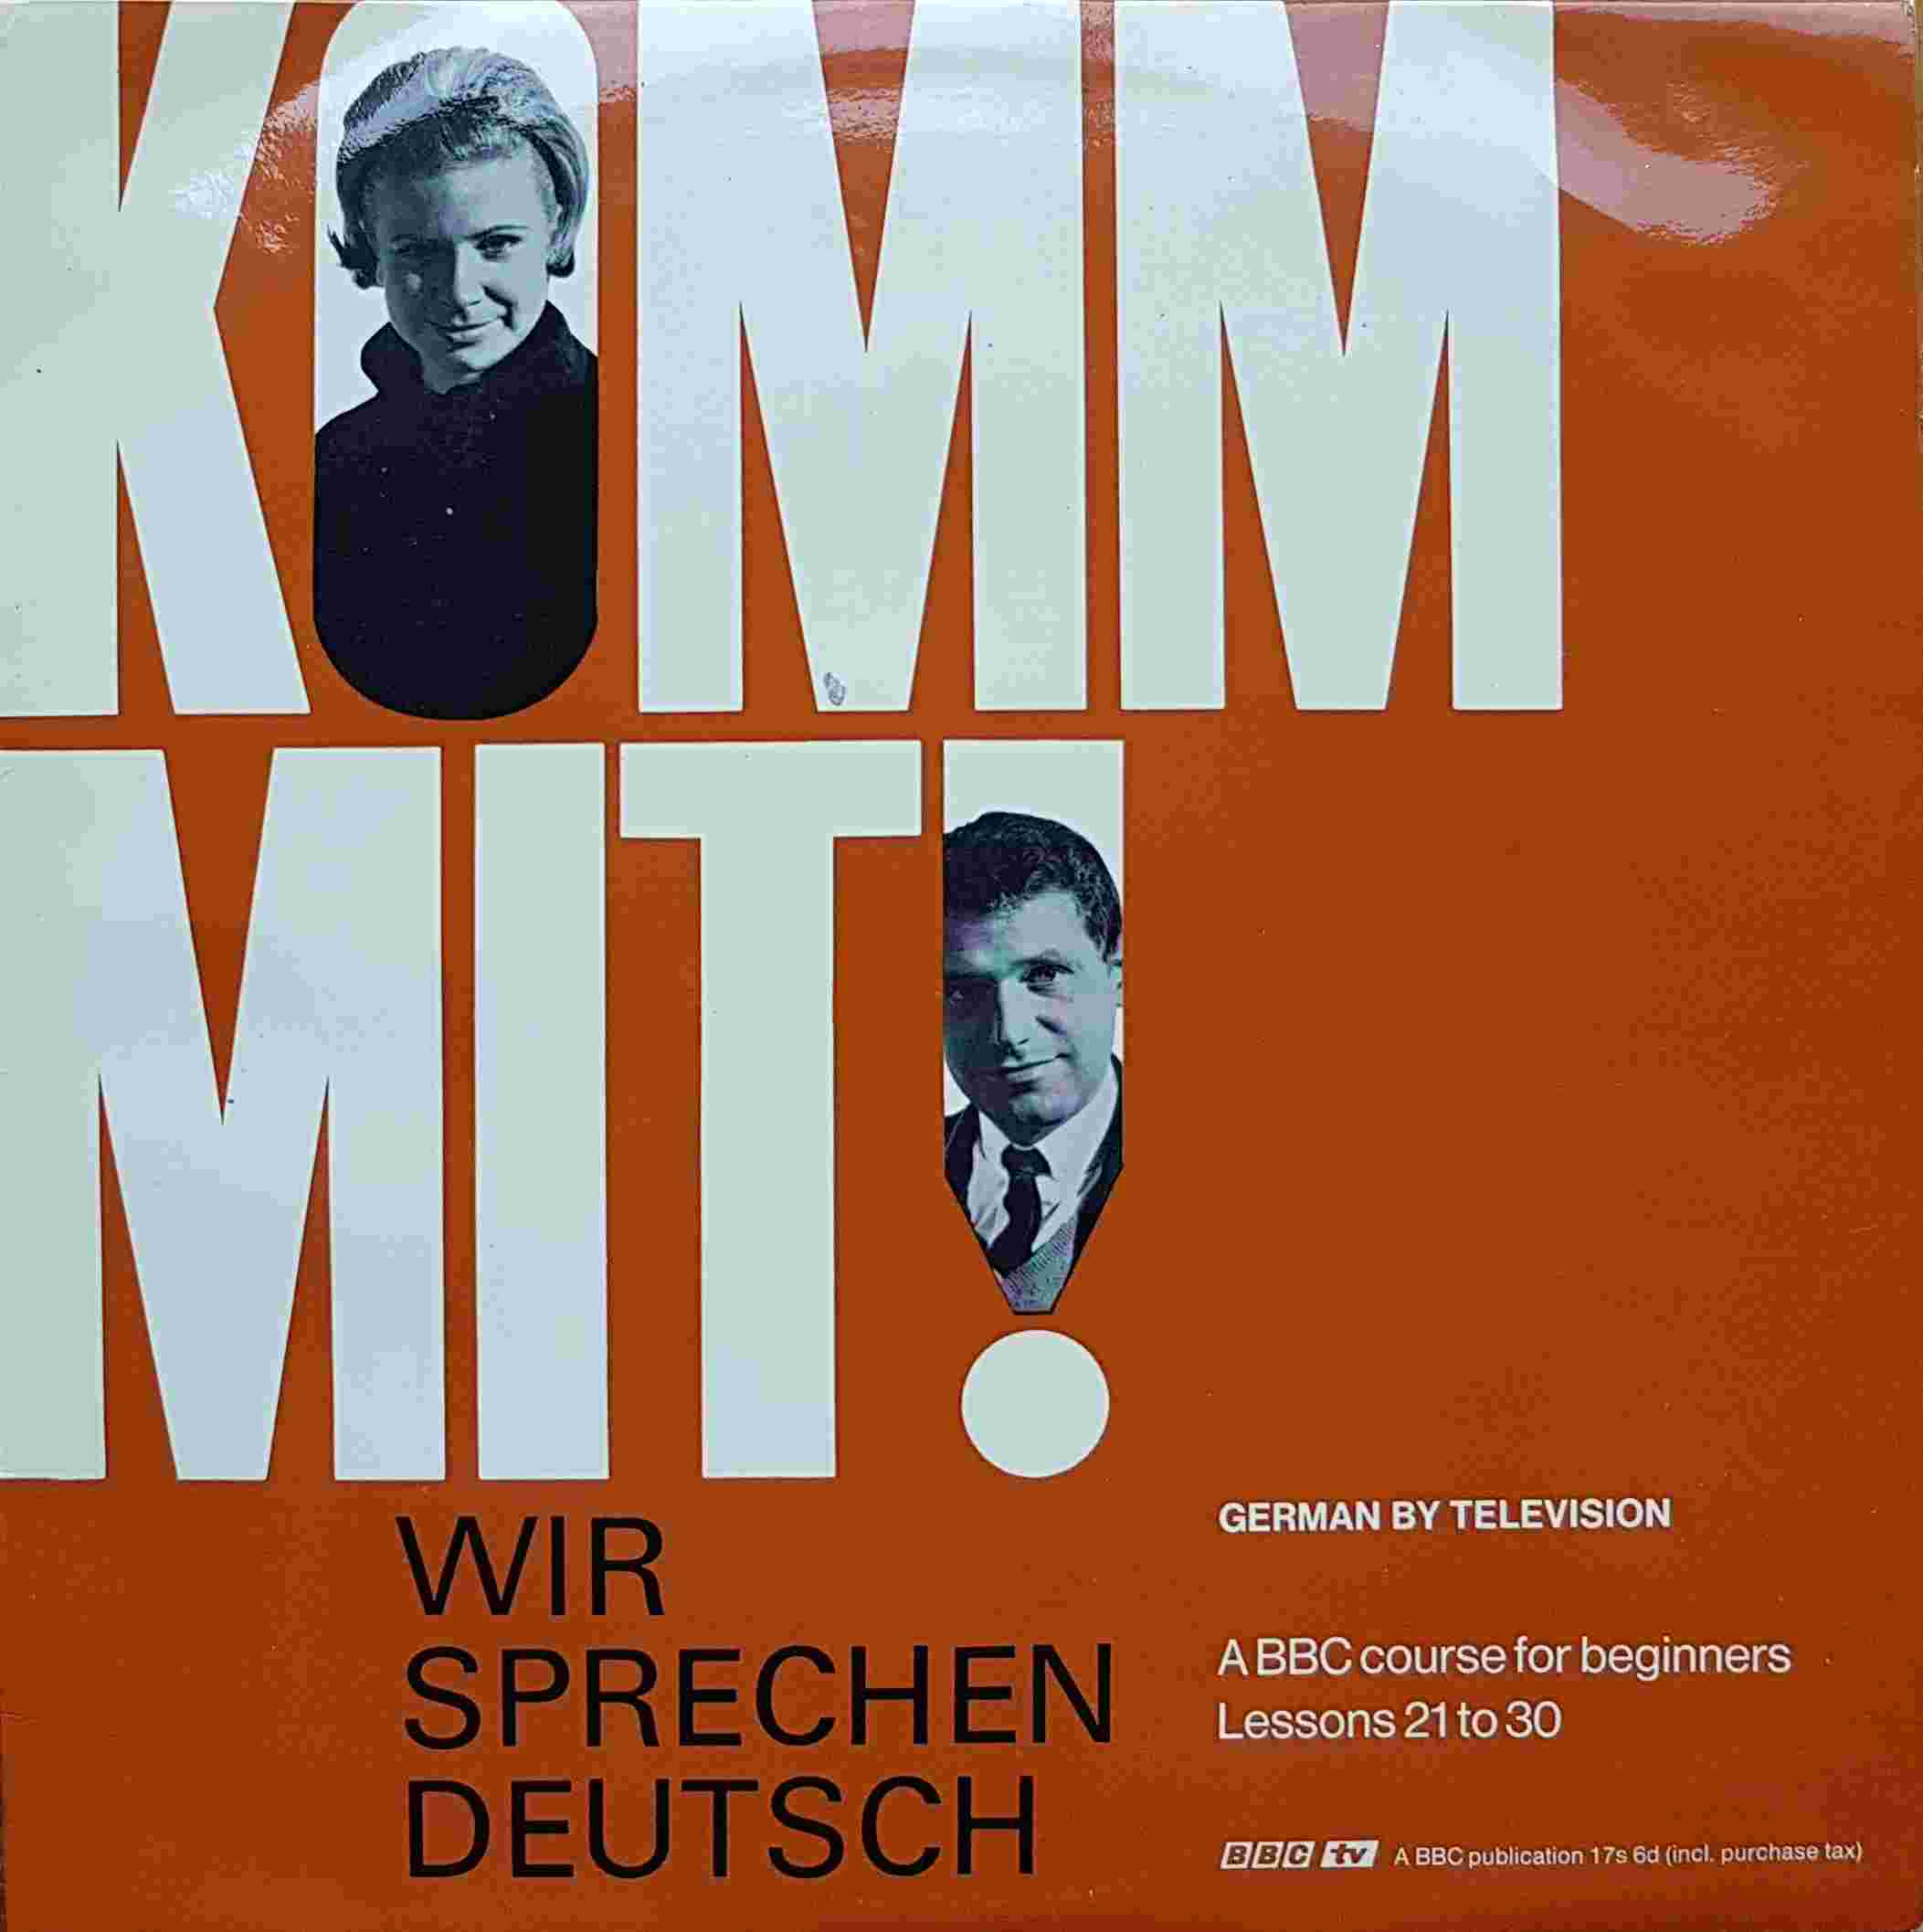 Picture of OP 13/14 Komm mit! Wir sprechen Deutsch - A BBC course for beginners lessons 21 - 30 by artist John L. M. Trim / Frank Kuna from the BBC albums - Records and Tapes library